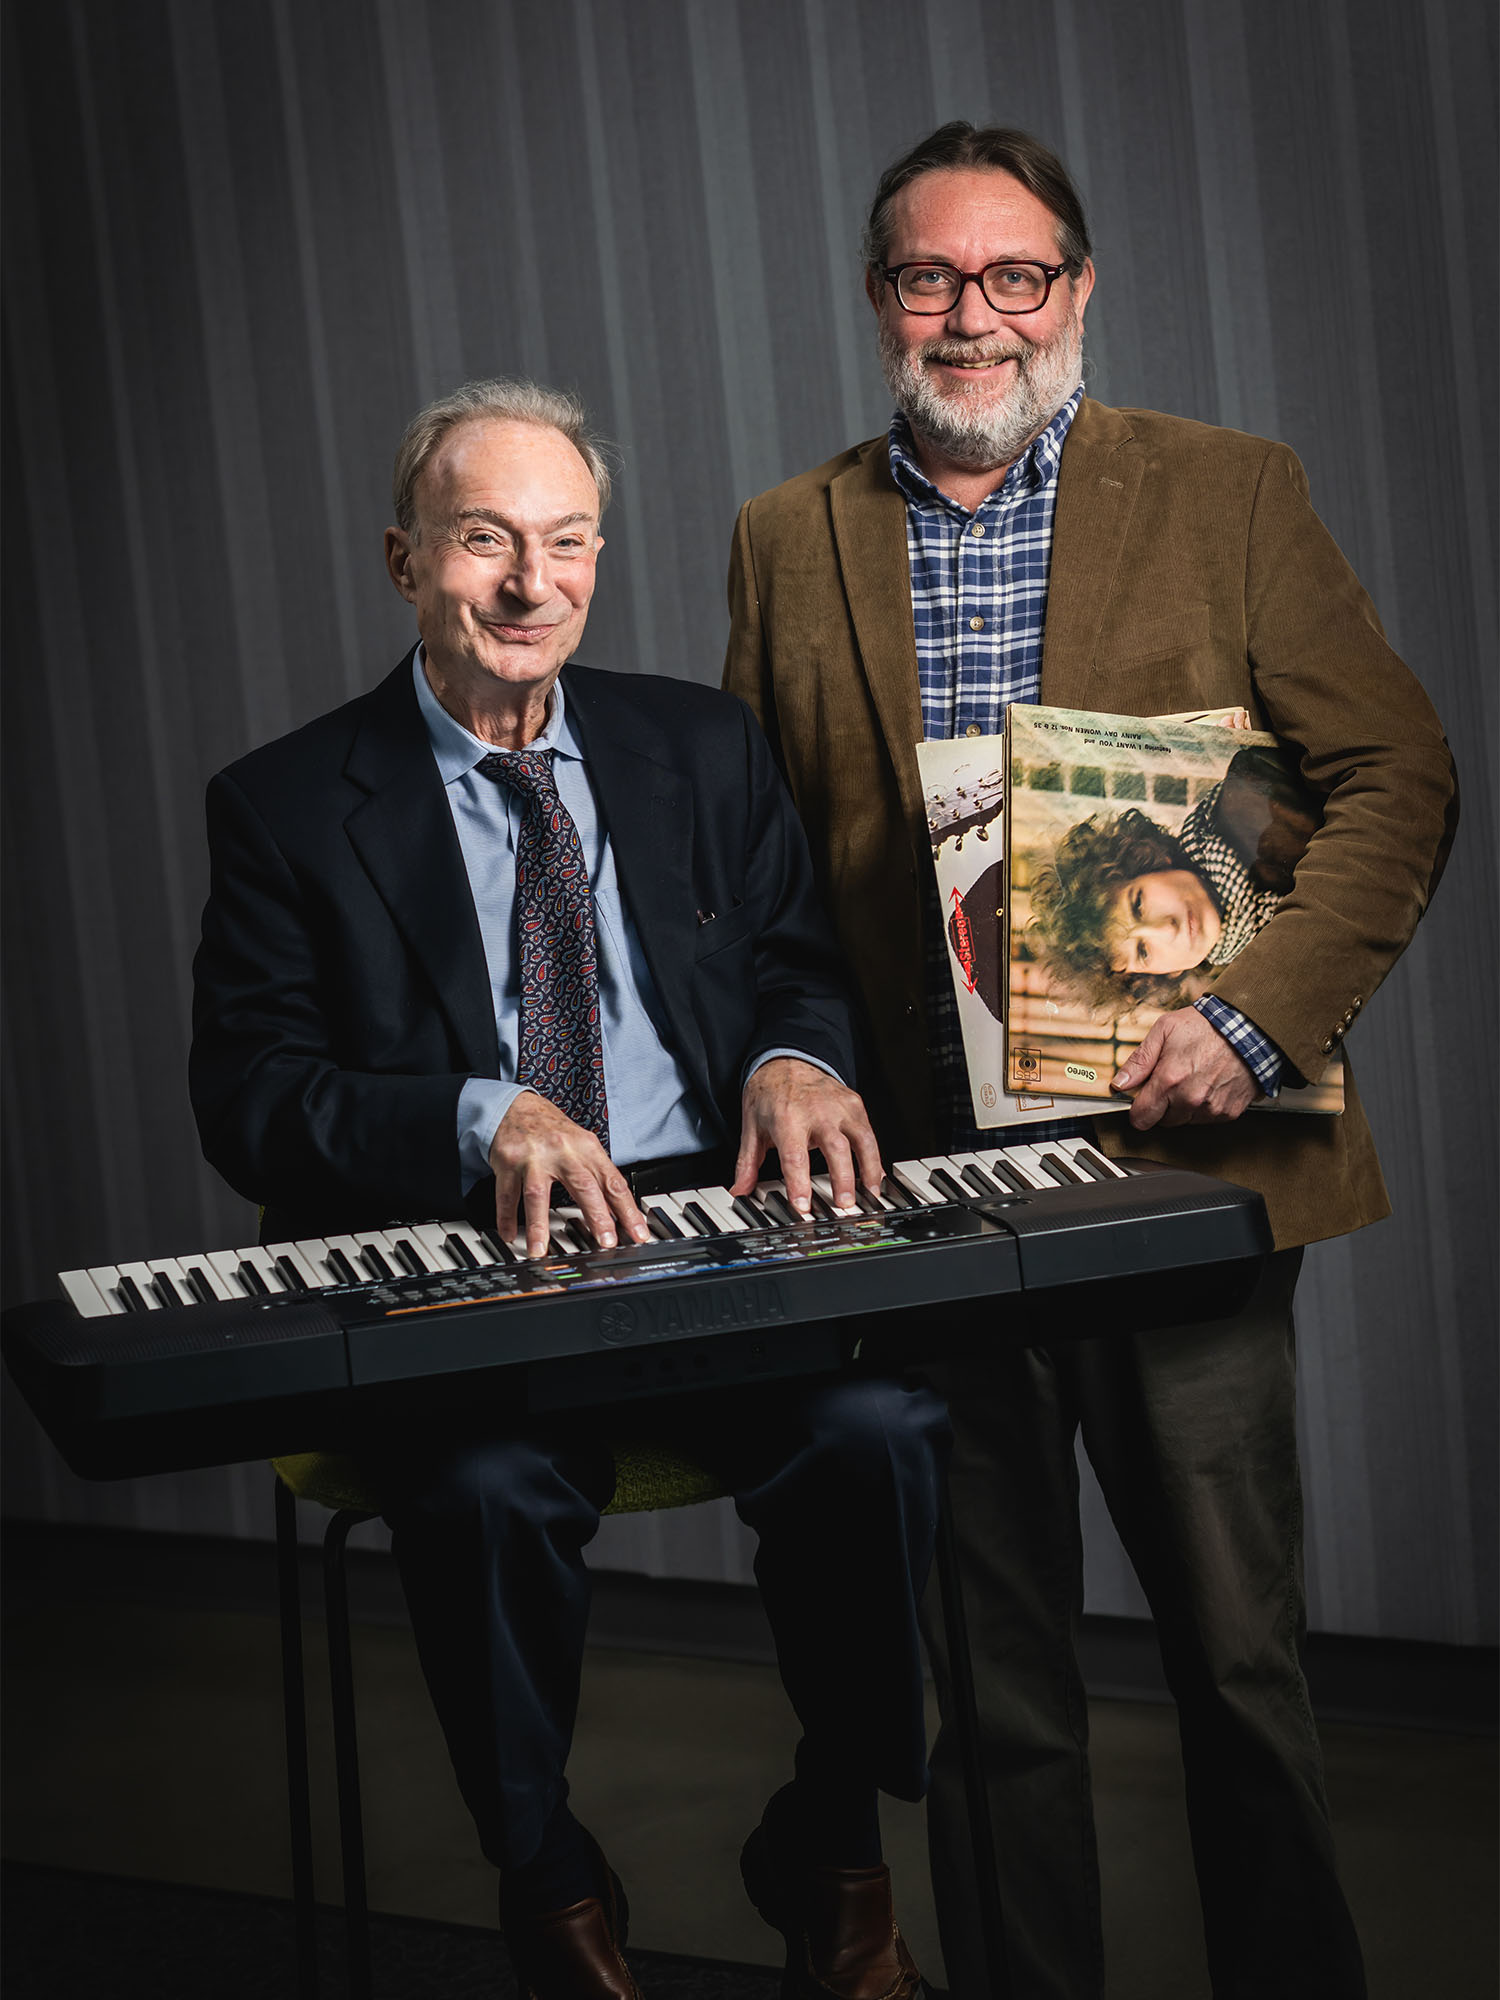 Photo: Two men in suits sitting in front of a piano with smiles on their faces. One is holding a Bob Dylan LP